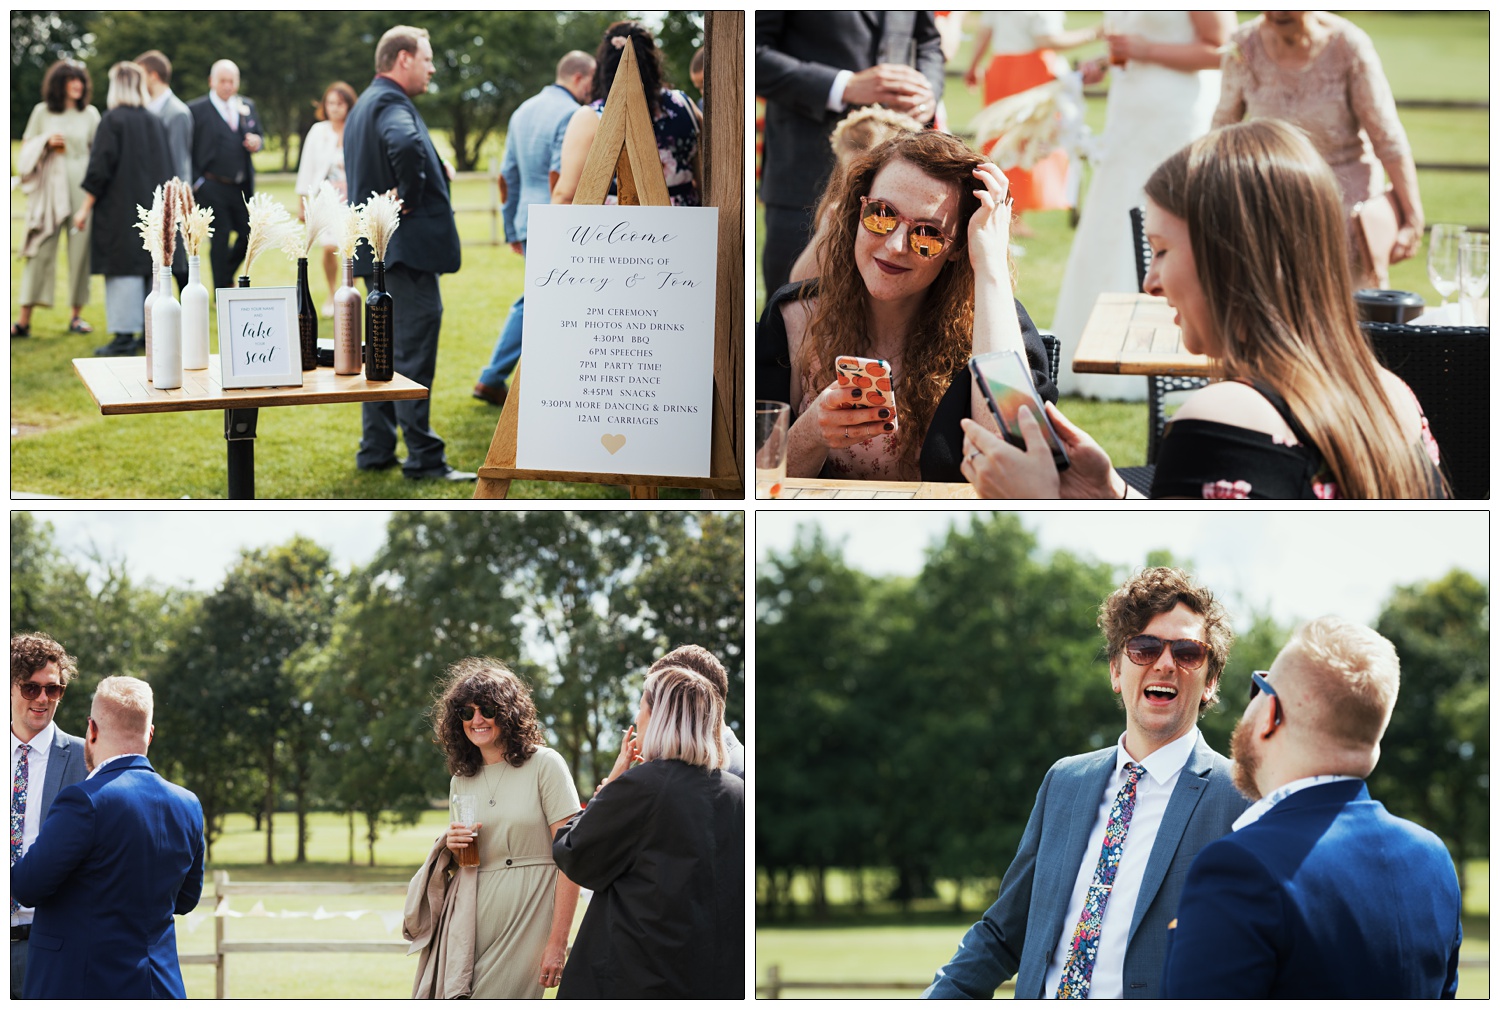 Sign with the order of the wedding day. Guests laugh and chat in the sunshine.